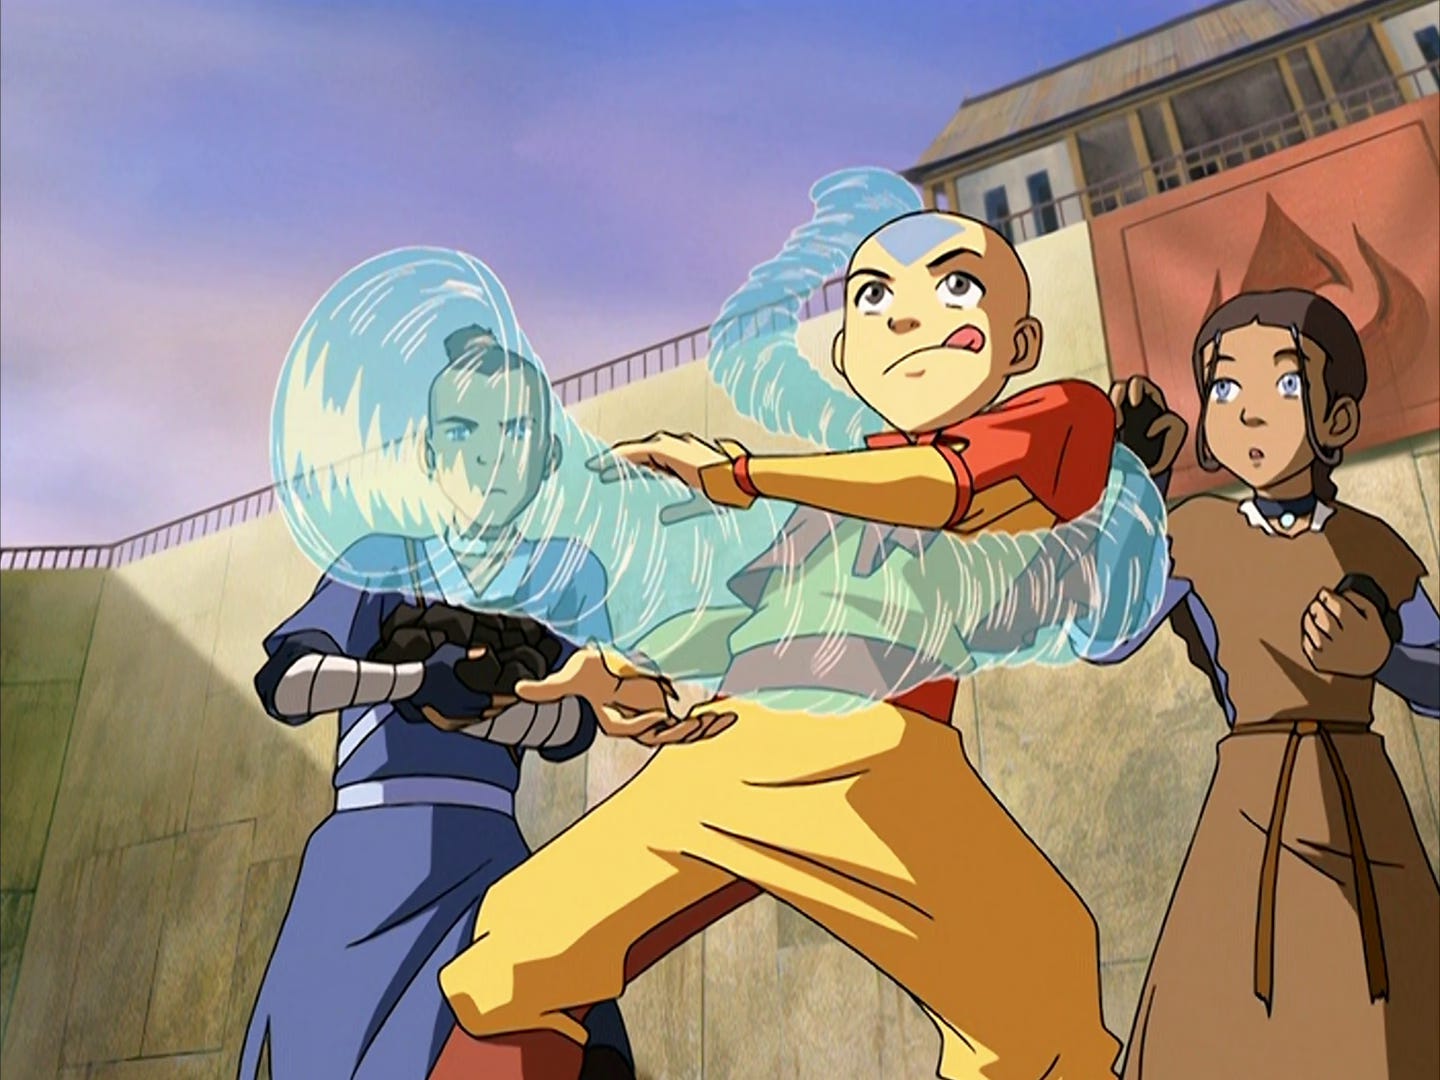 Aang holds a swirling funnel of air like a missile launcher while Sokka and Katara reach to drop coal into it.